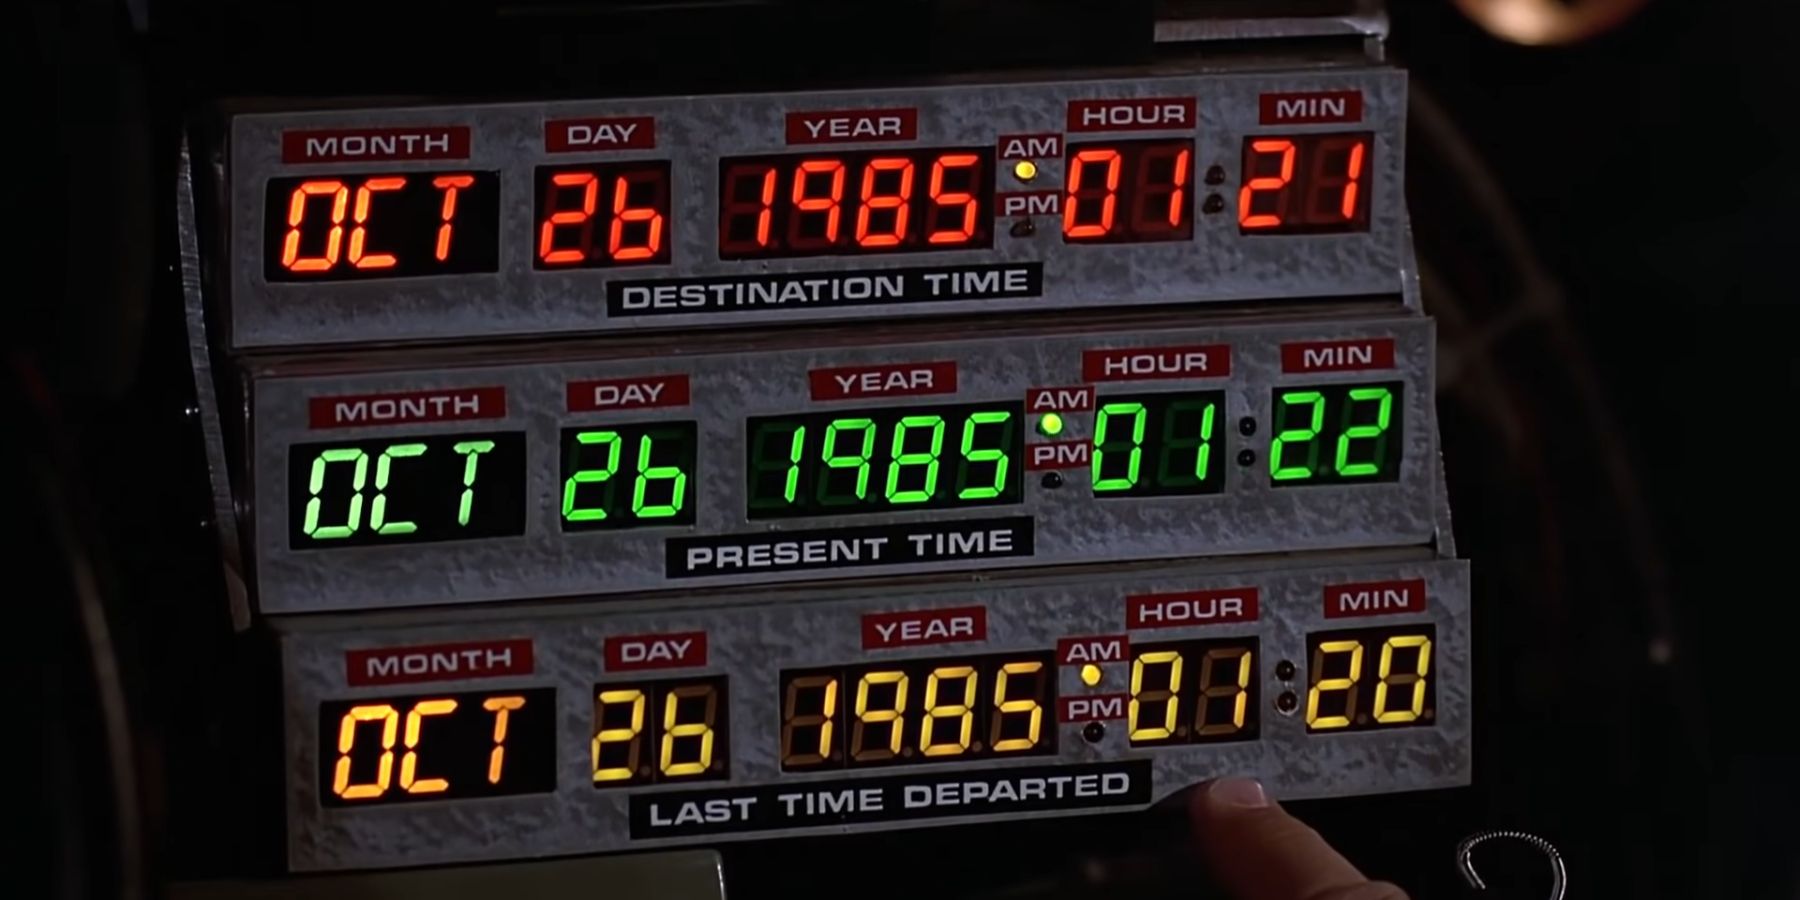 Doc Brown explaining the DeLorean's time circuits in Back To The Future